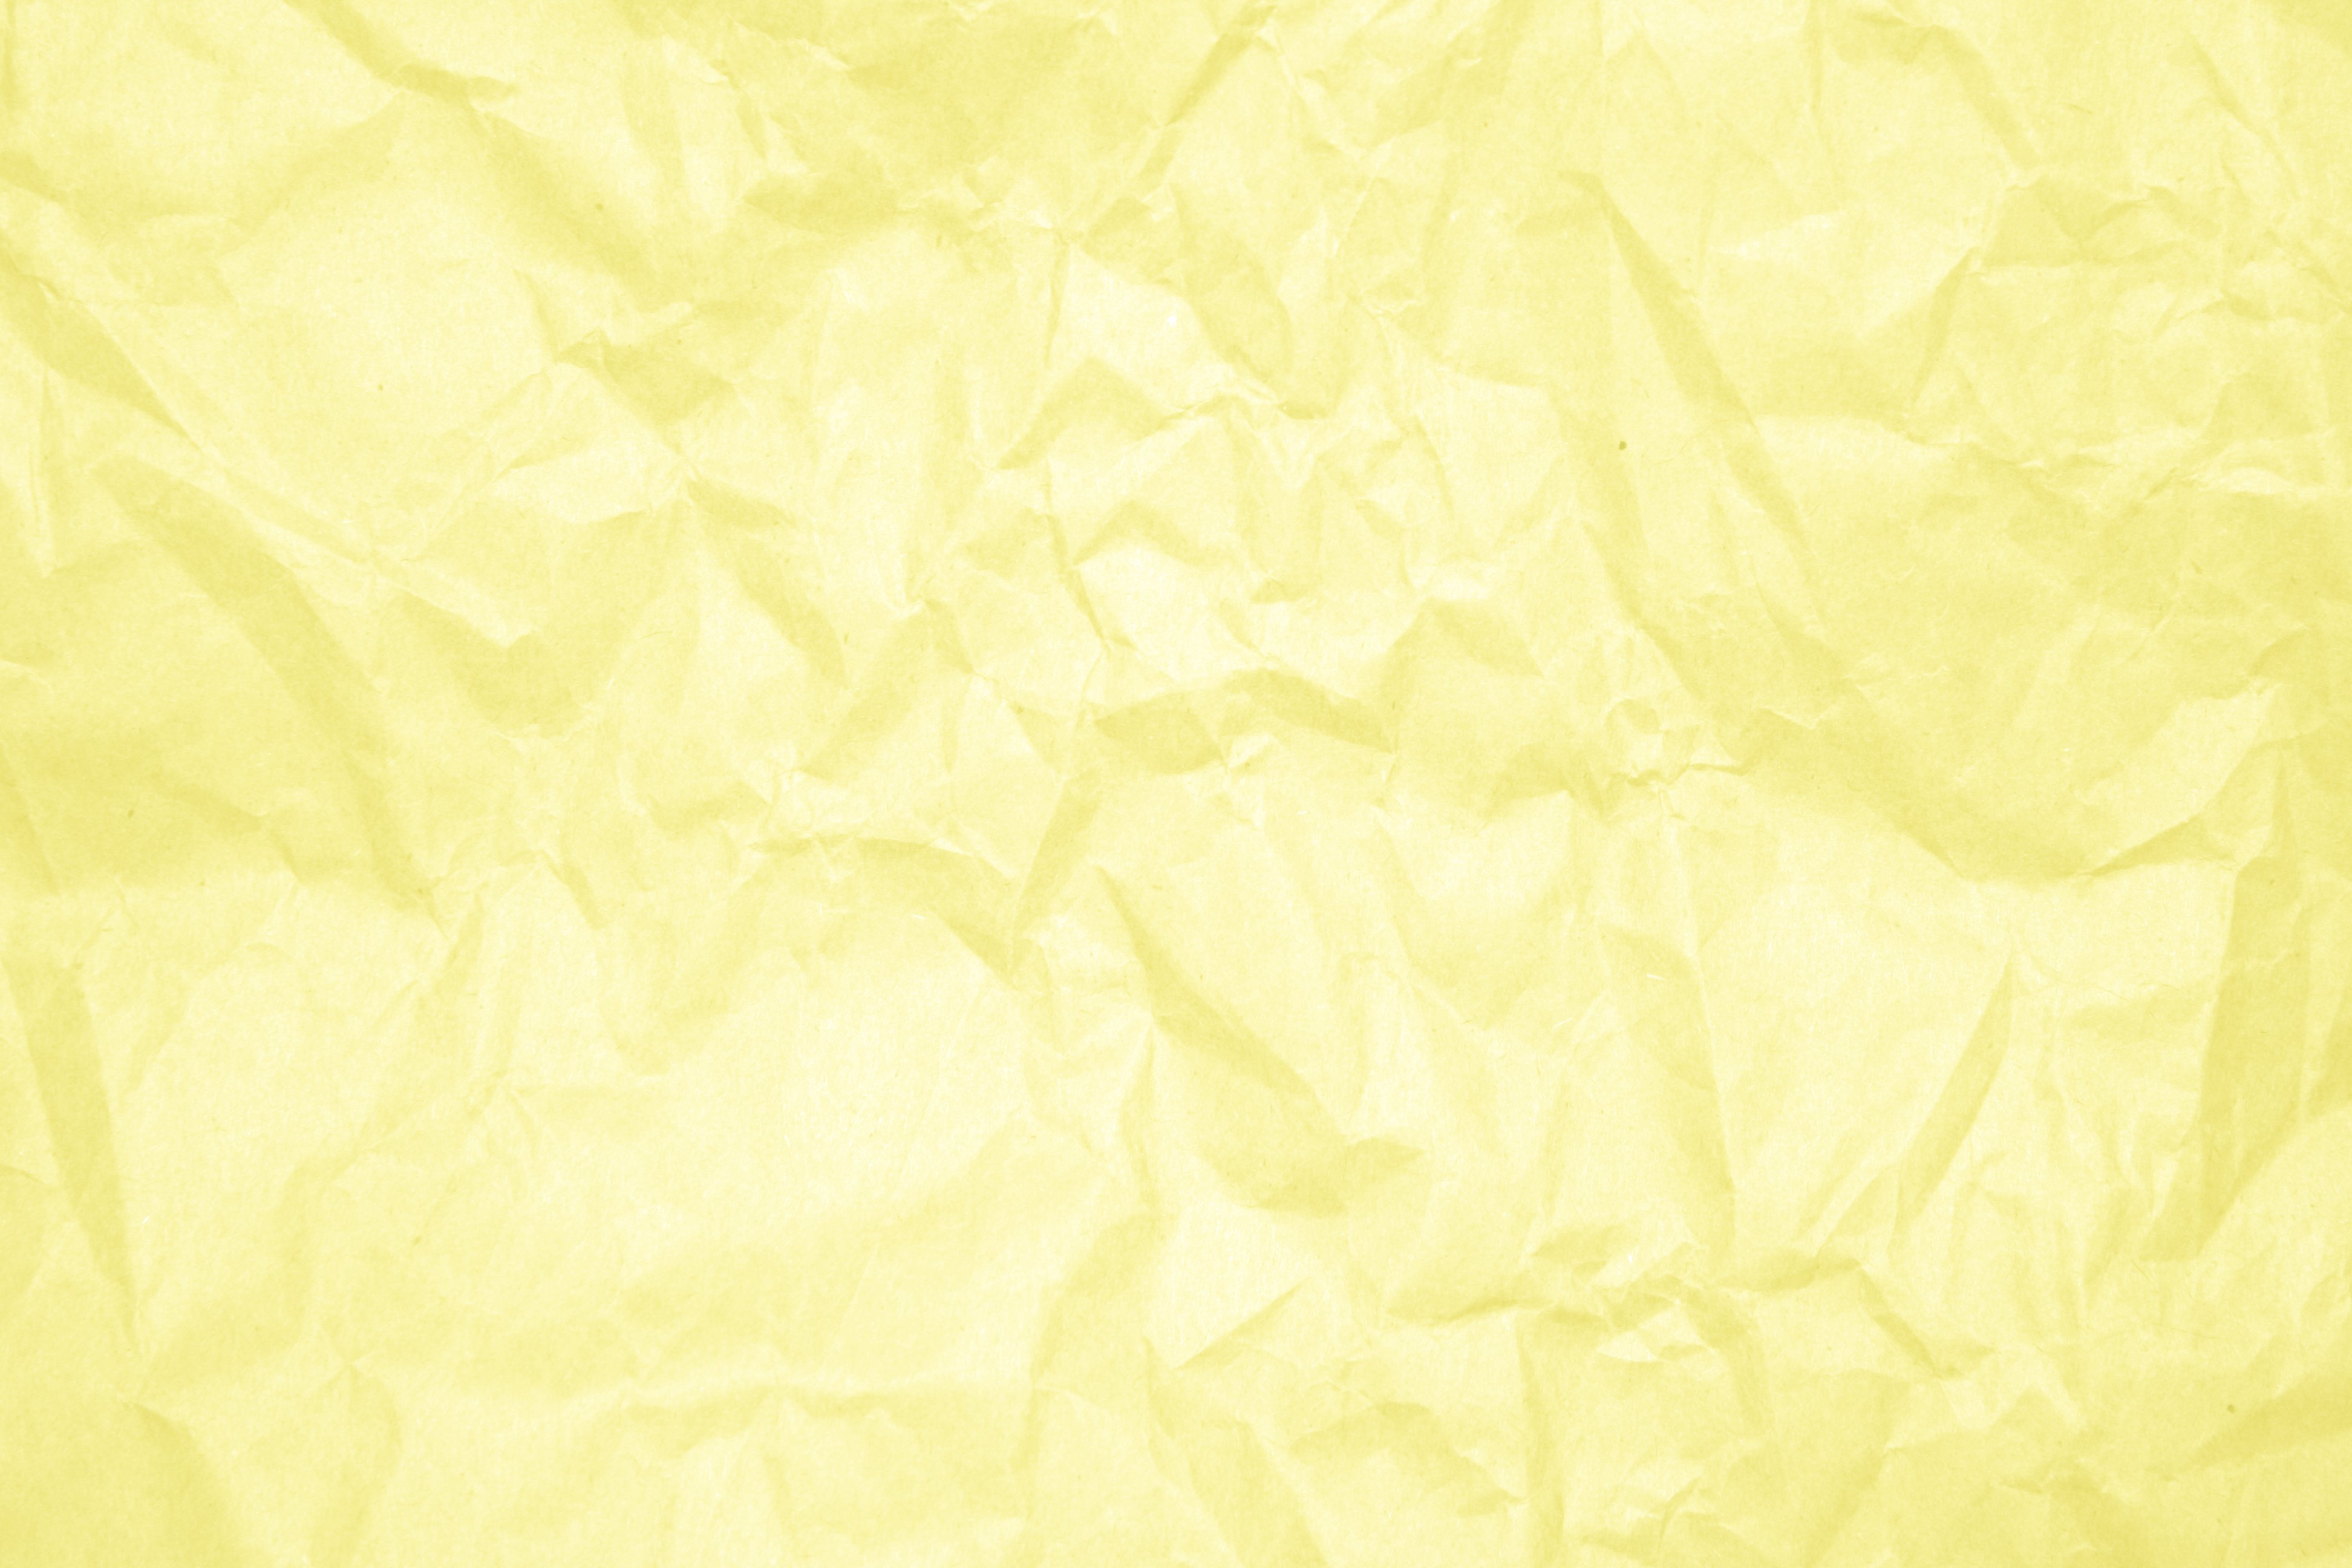 yellow paper background